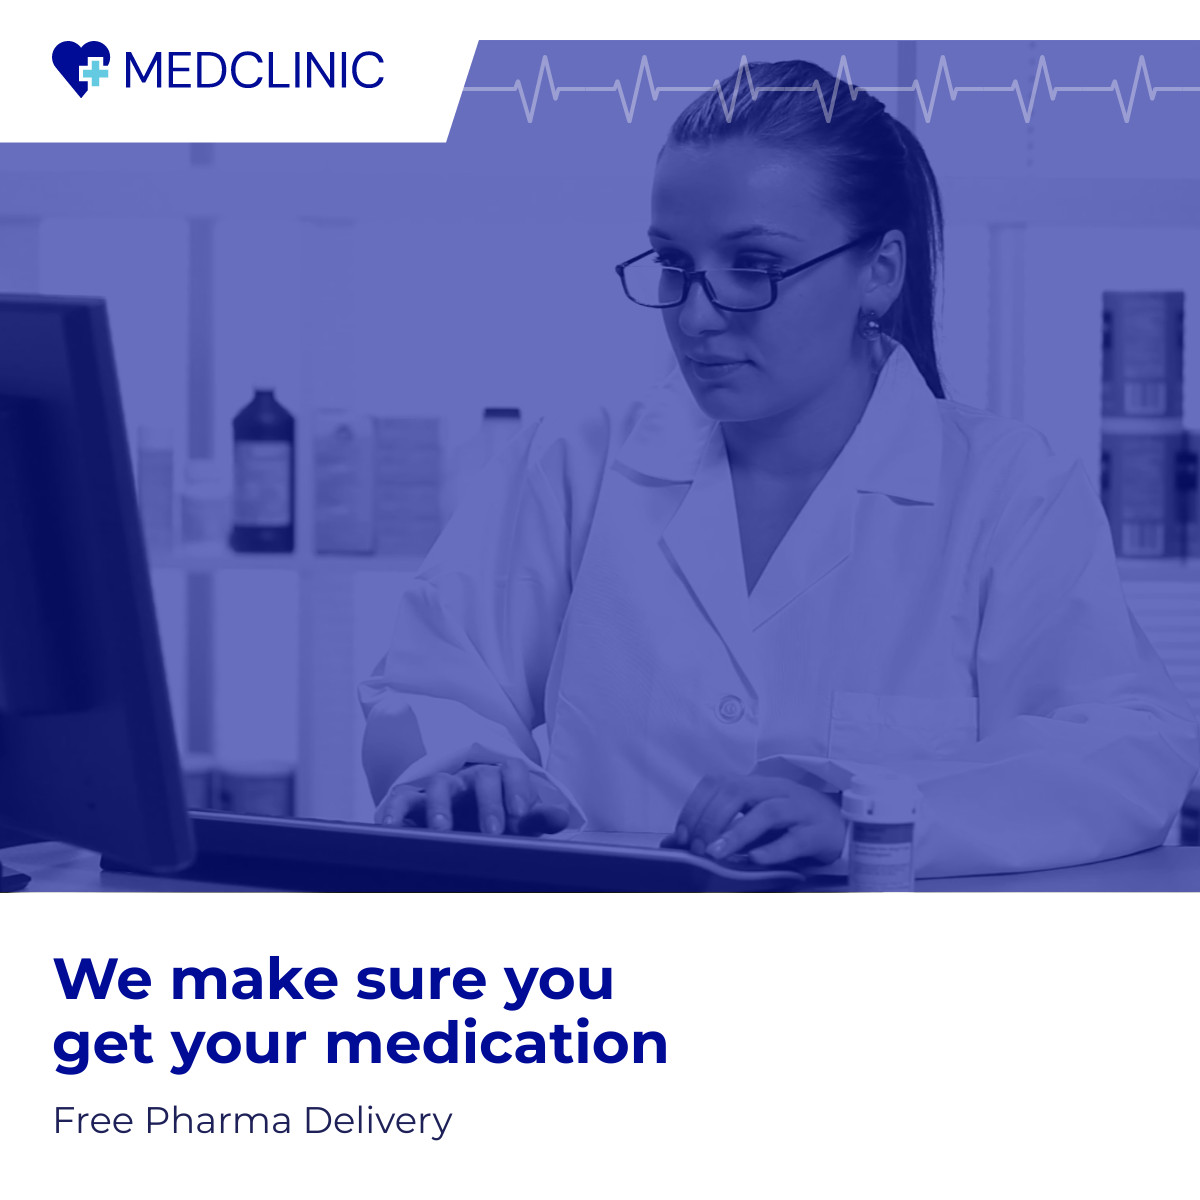 Mediclinic Pharma Medication Delivery Video